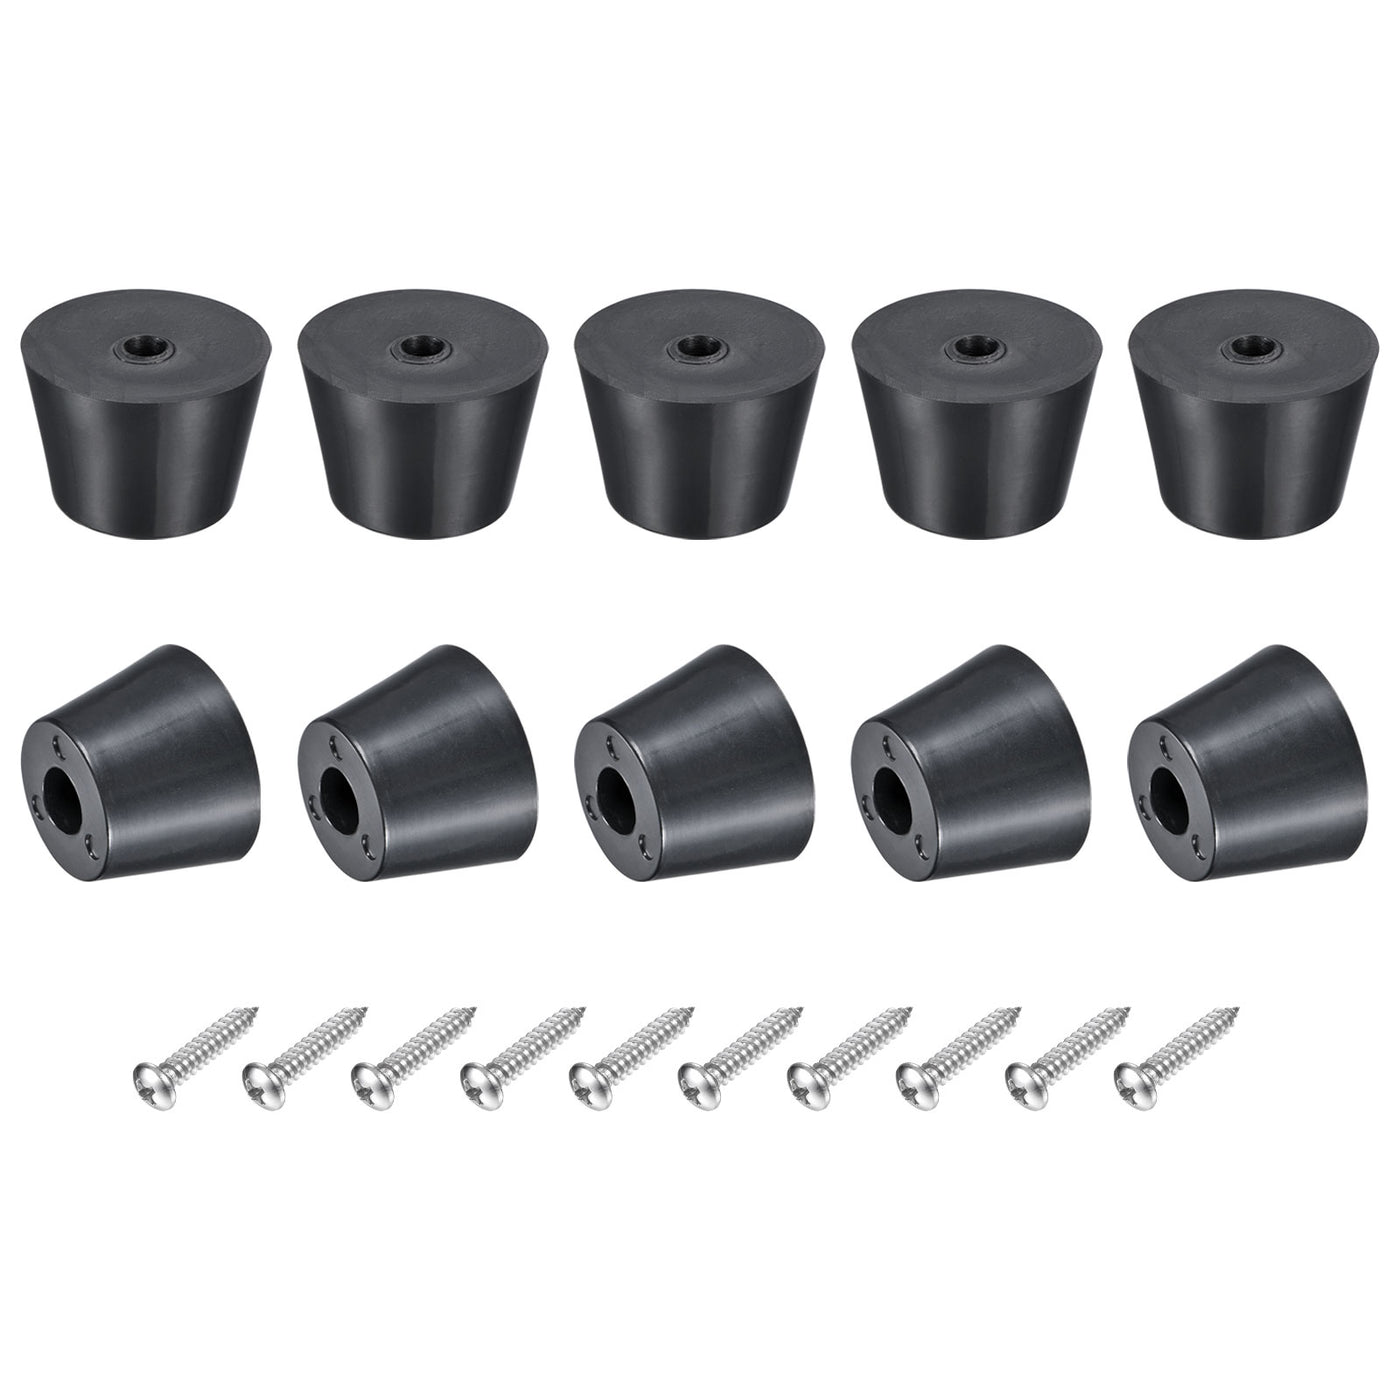 uxcell Uxcell Rubber Bumper Feet, 0.79" H x 1.14" W Round Pads with Stainless Steel Washer and Screws for Furniture, Appliances, Electronics 20 Pcs